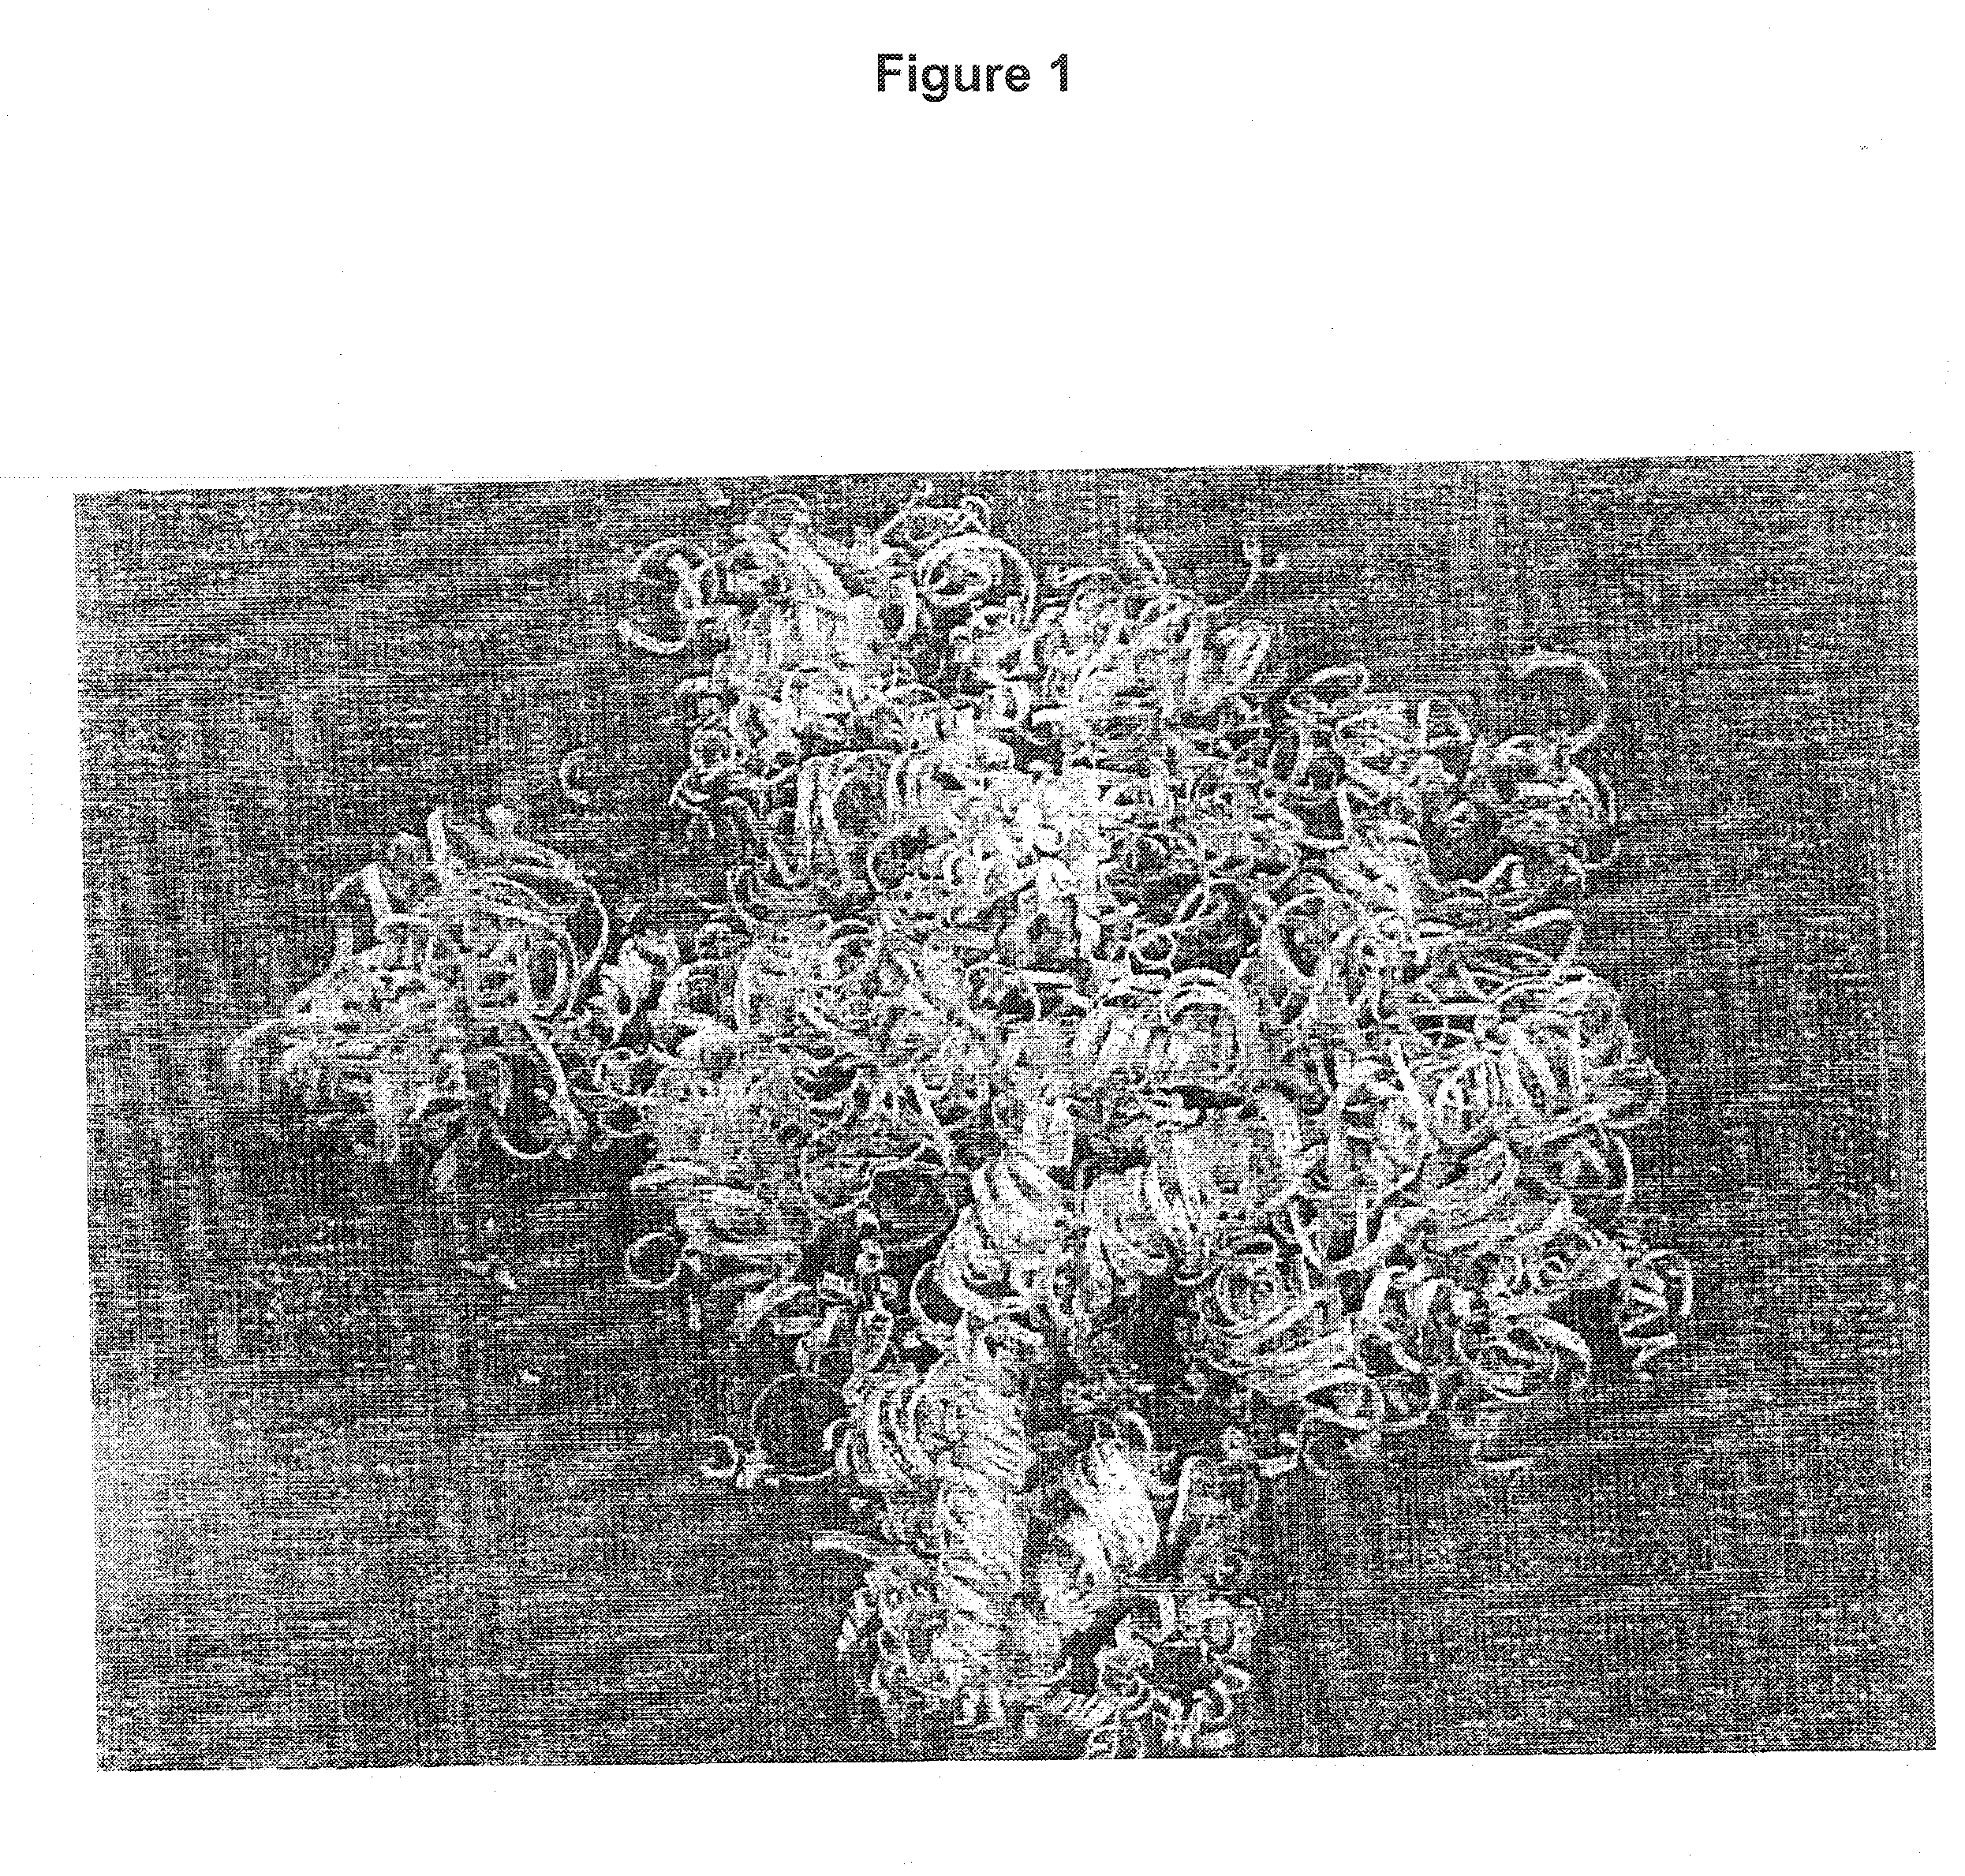 Device and Process for Producing Fiber Products and Fiber Products Produced Thereby